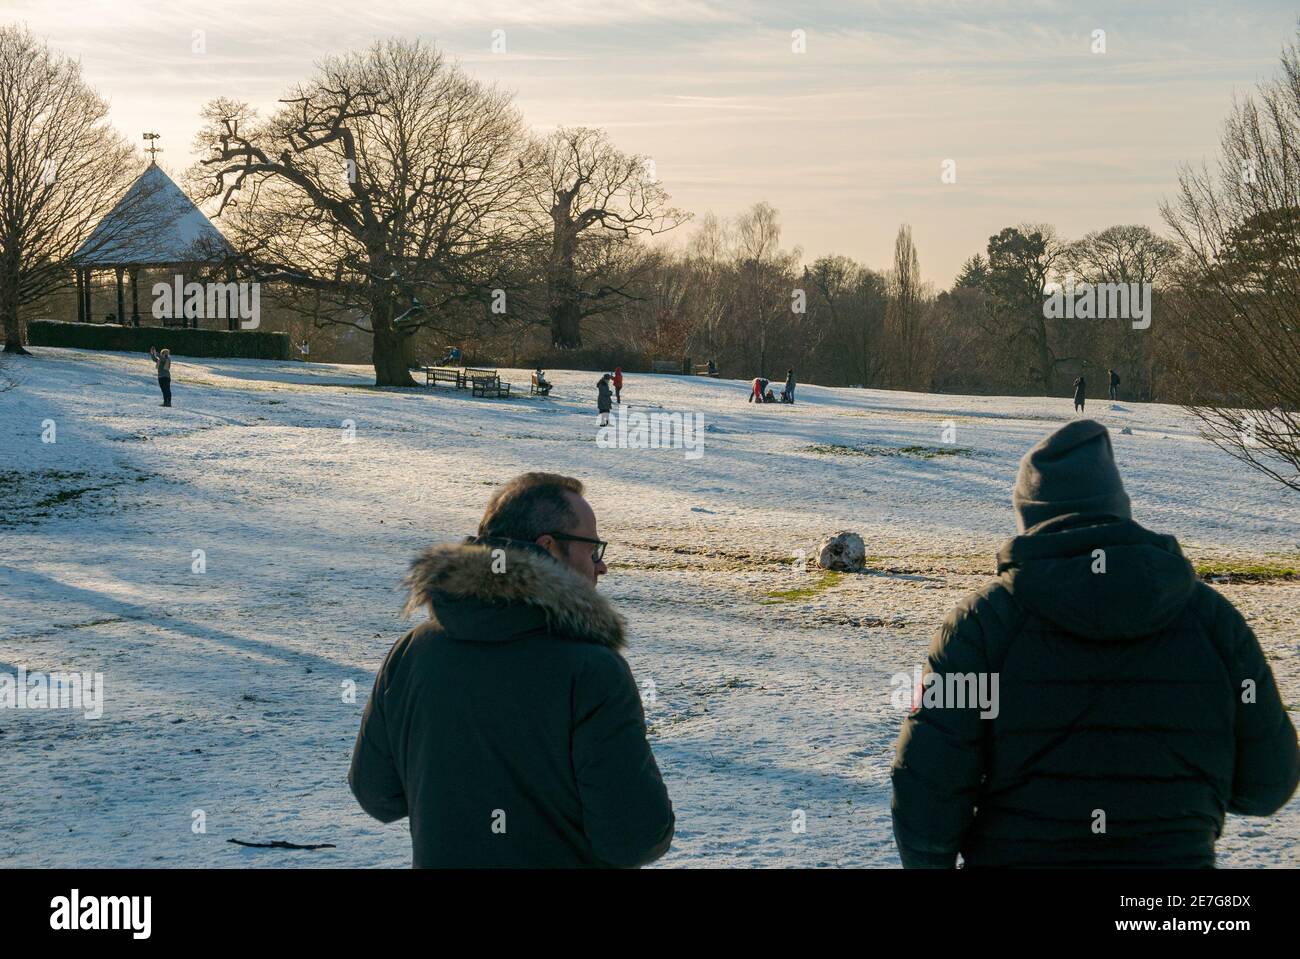 Two dads watch their children play in the snow in Golders Hill Park, London. The men wear winter clothing as the sun sets over Hampstead Heath, UK. Stock Photo